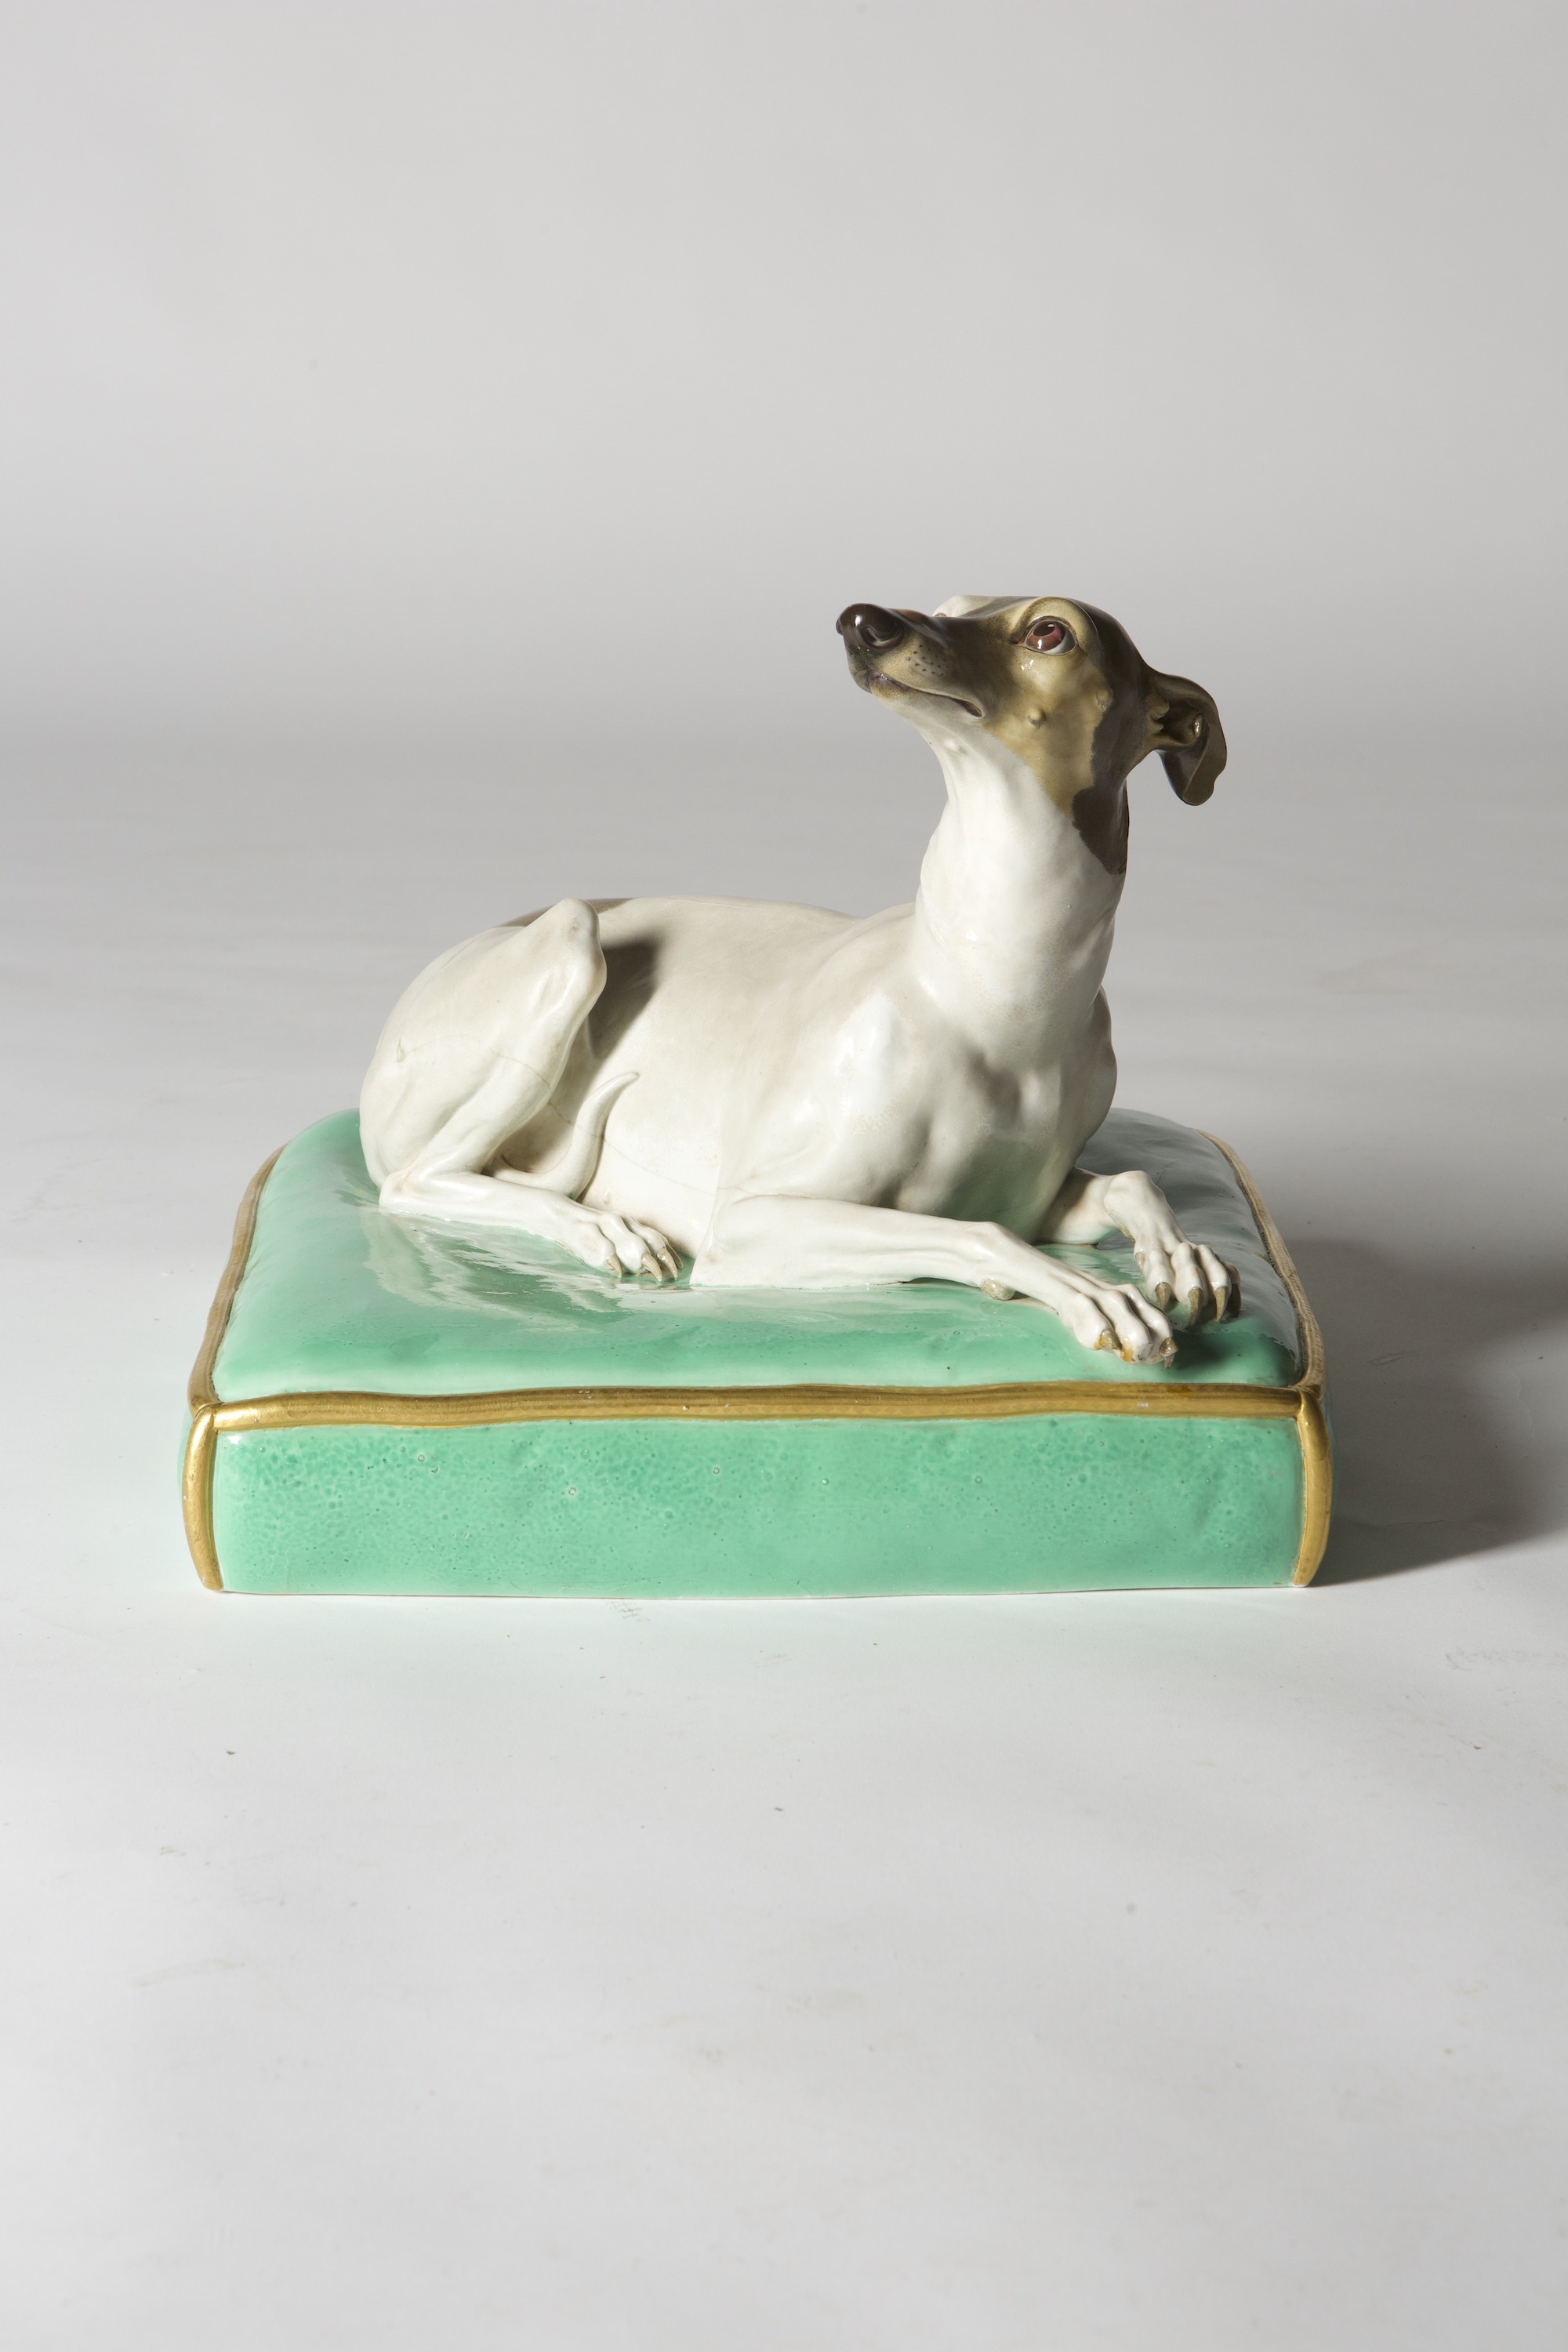 Figurine of the Italian Greyhound by Jean-Dominique Rachette - 1780s Slovak National Museum - Museum of History